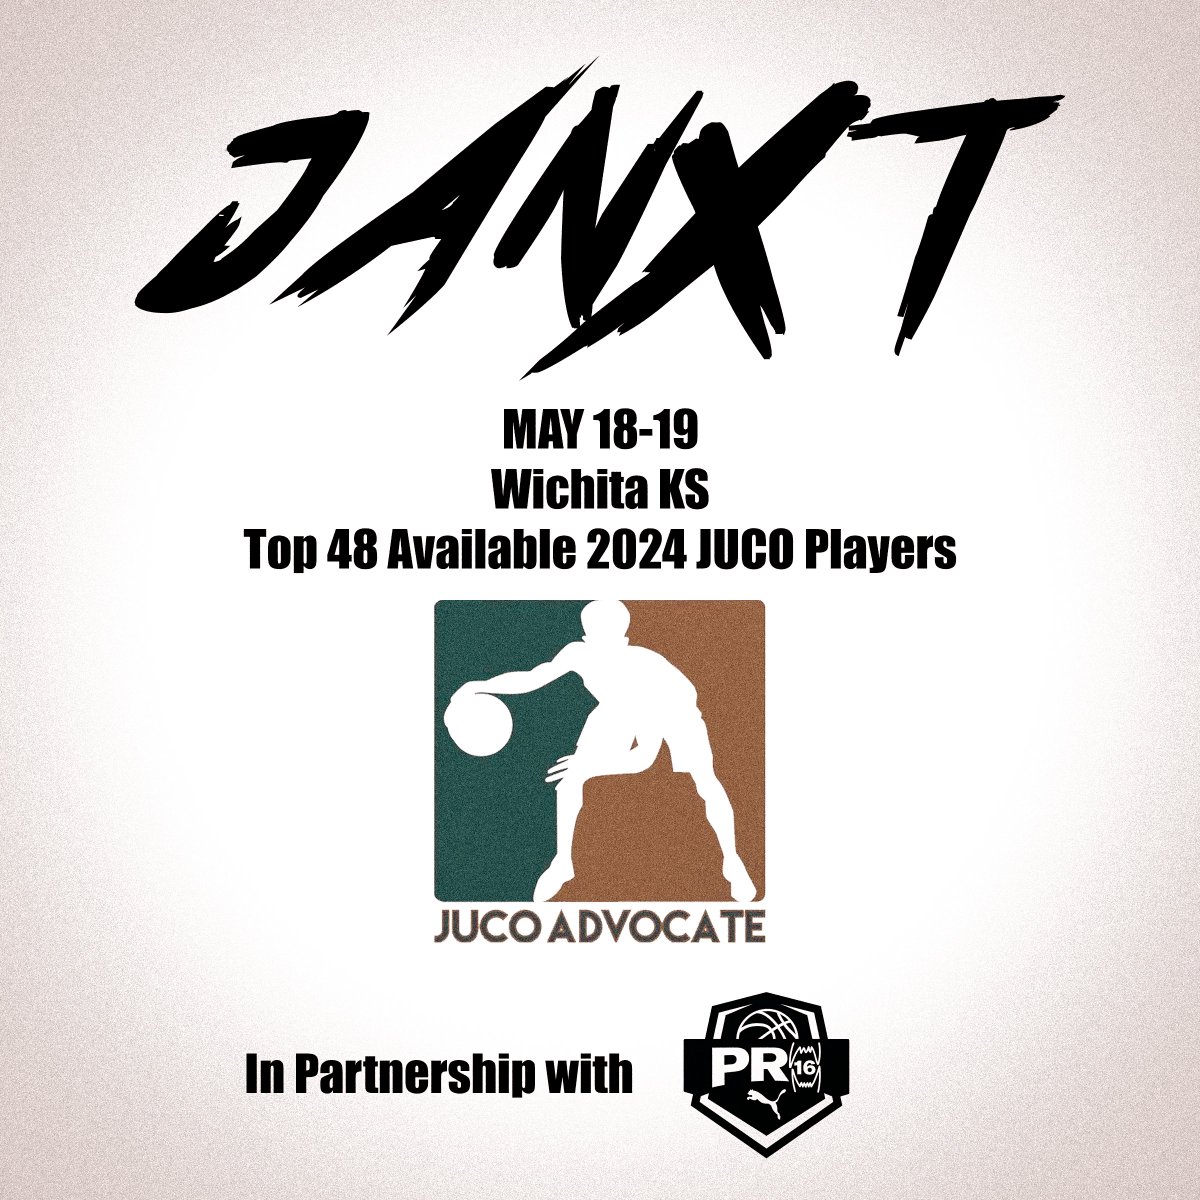 Exciting announcement!!! Coming Soon!!! JANXT in partnership with @PRO16League The top 48 available 2024 JUCO players still looking to sign with 4 year schools!!! 6 Teams of 8 1 Court Full Regulation Games May 18-19 in Wichita Kansas PLAYER INVITES COMING SOON